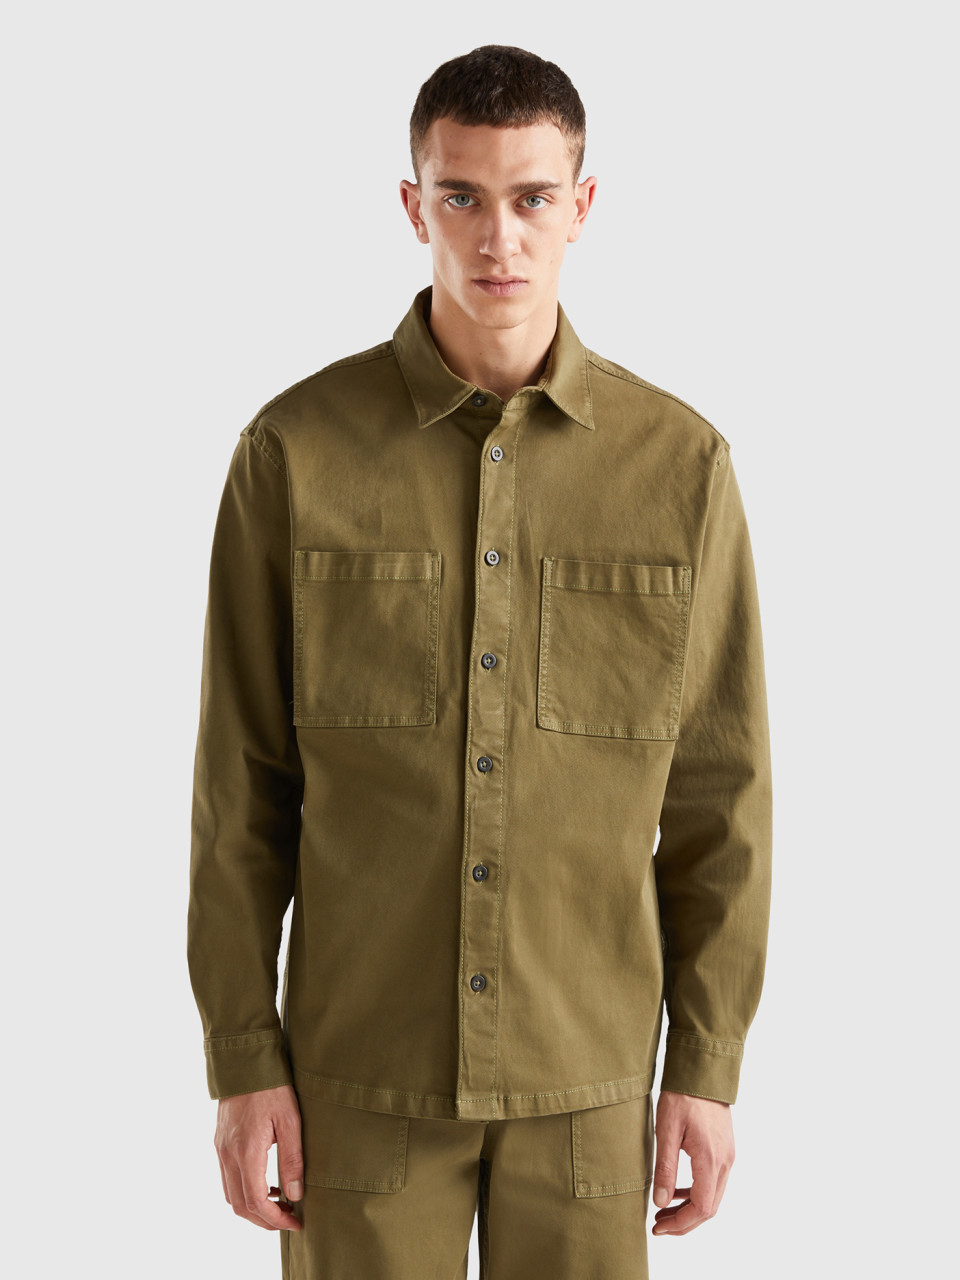 Benetton, Overshirt With Pockets, Military Green, Men